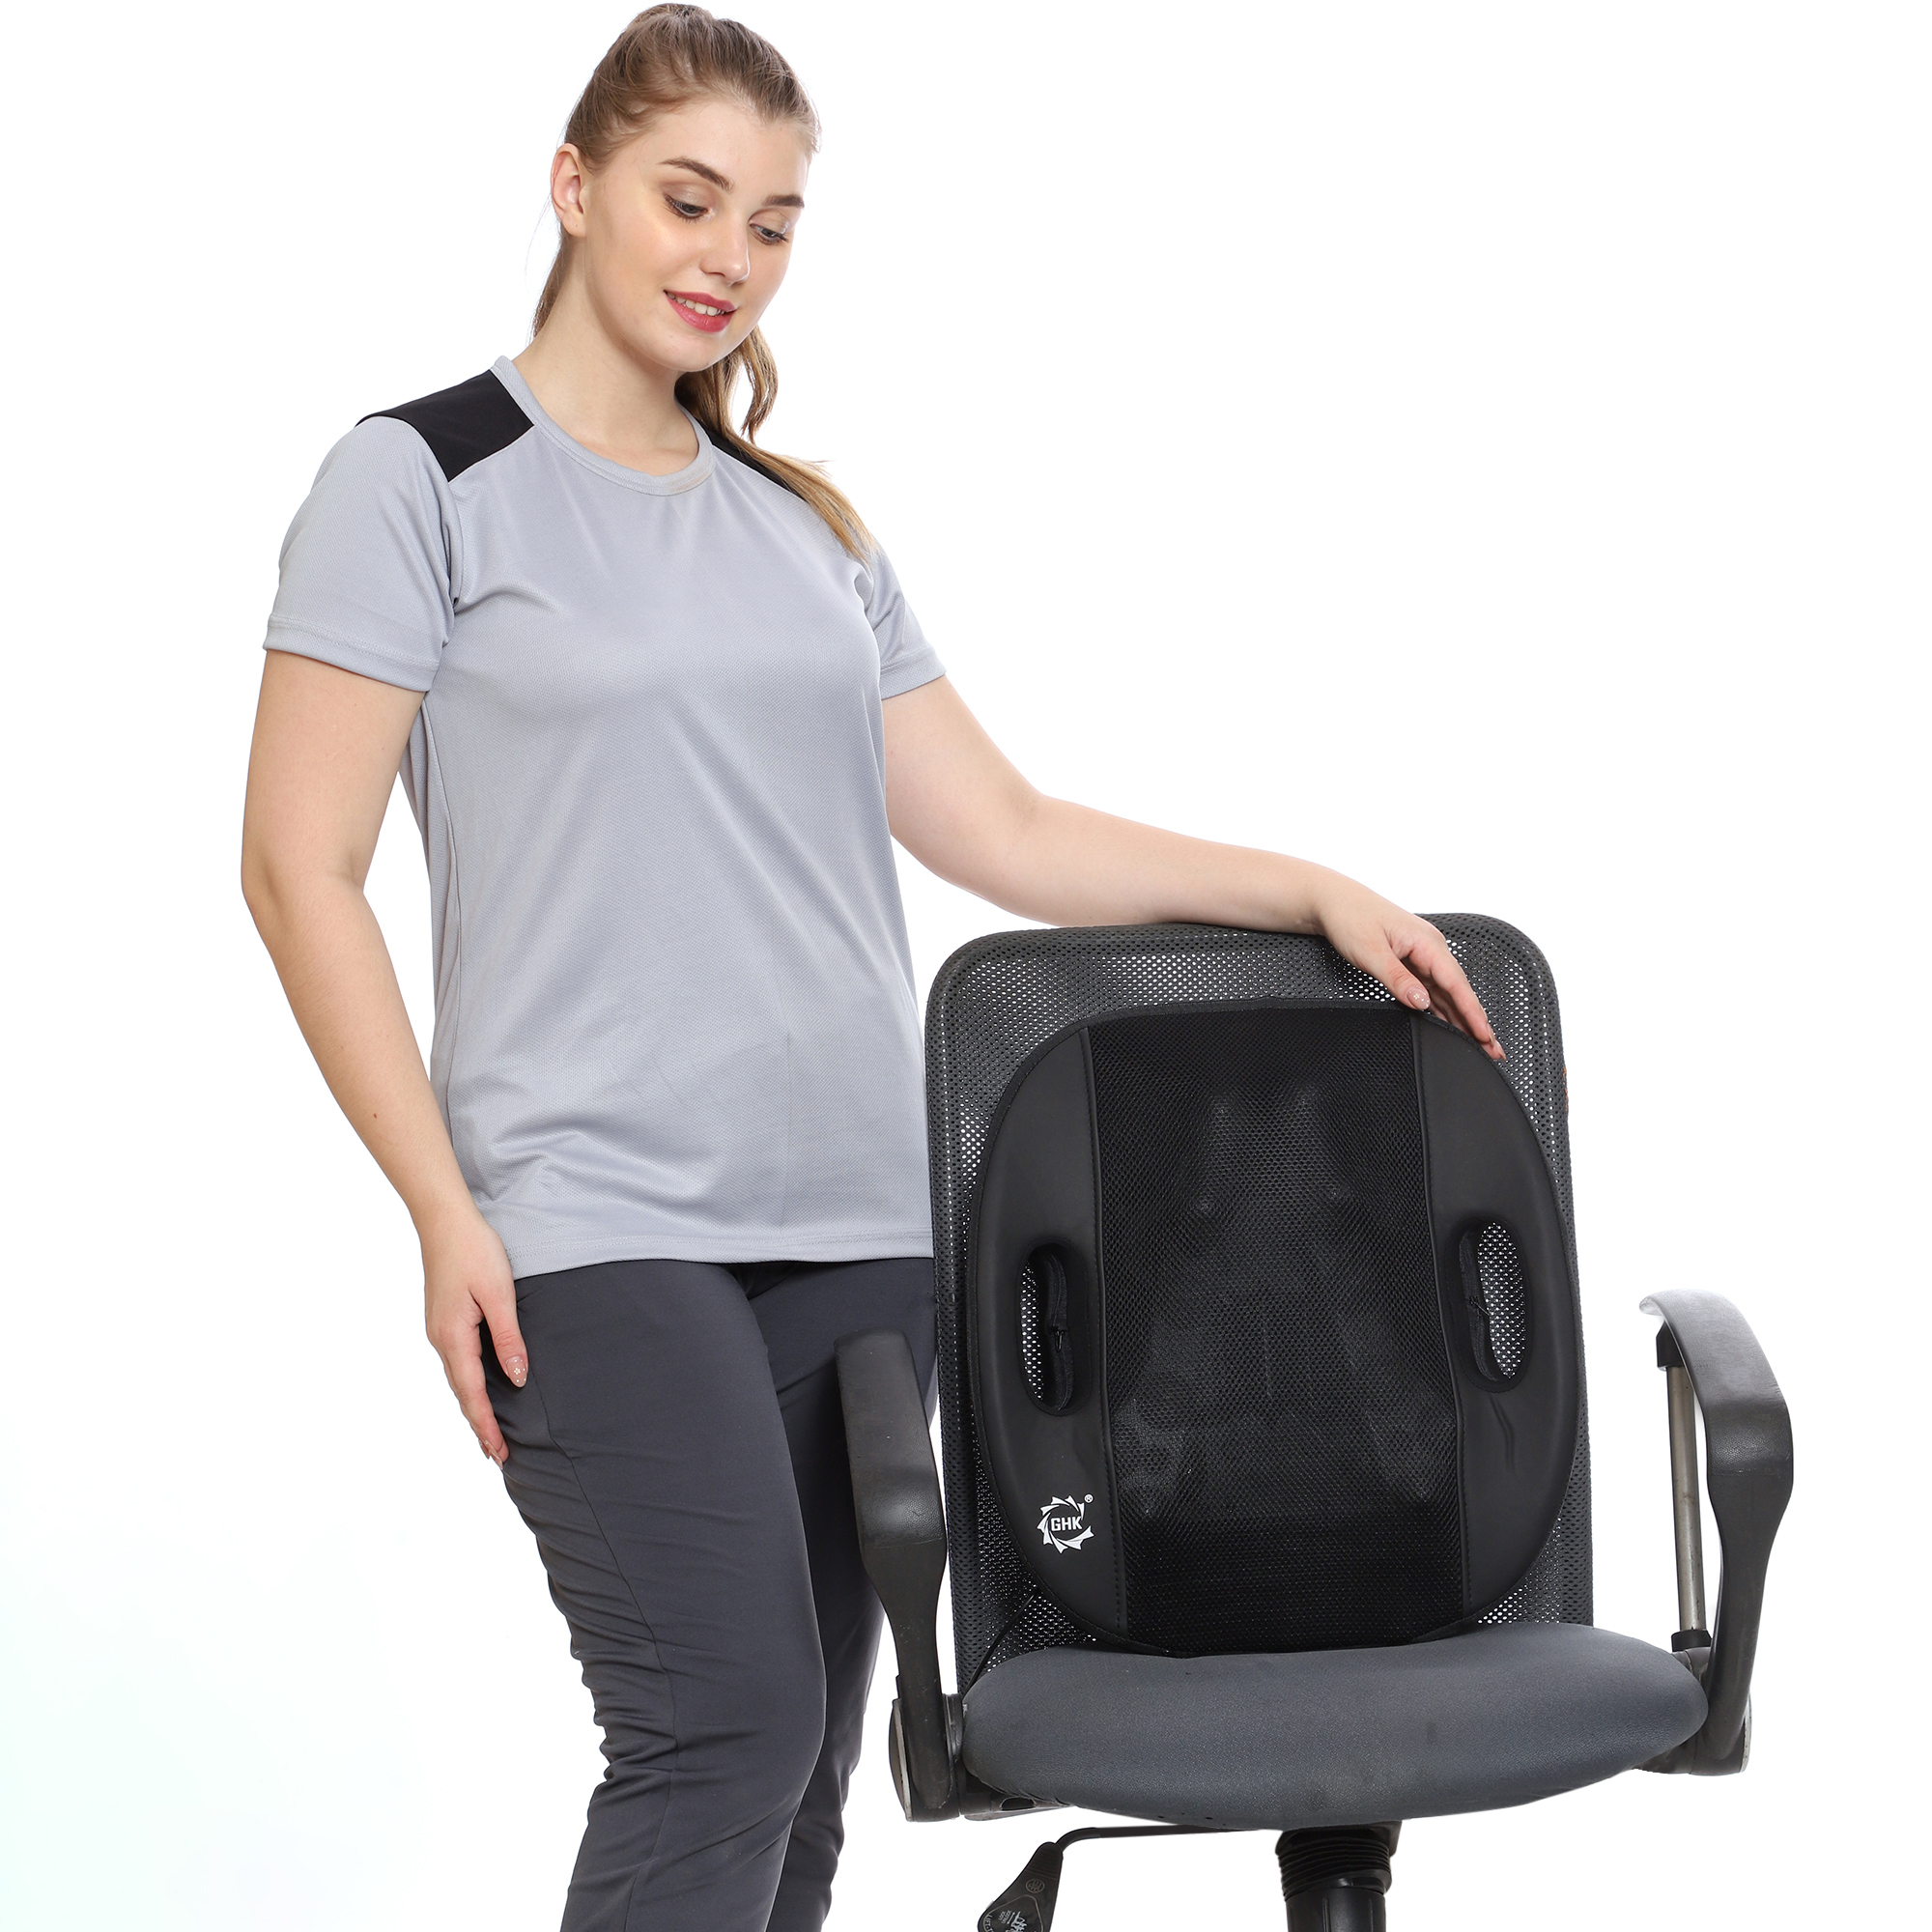 GHK H90 Shiatsu Back, Neck, Calf 12 Ball Multifunction Massage Cushion Machine for Car, Home & Office Use Car Charger & Electric Charger Inclusive